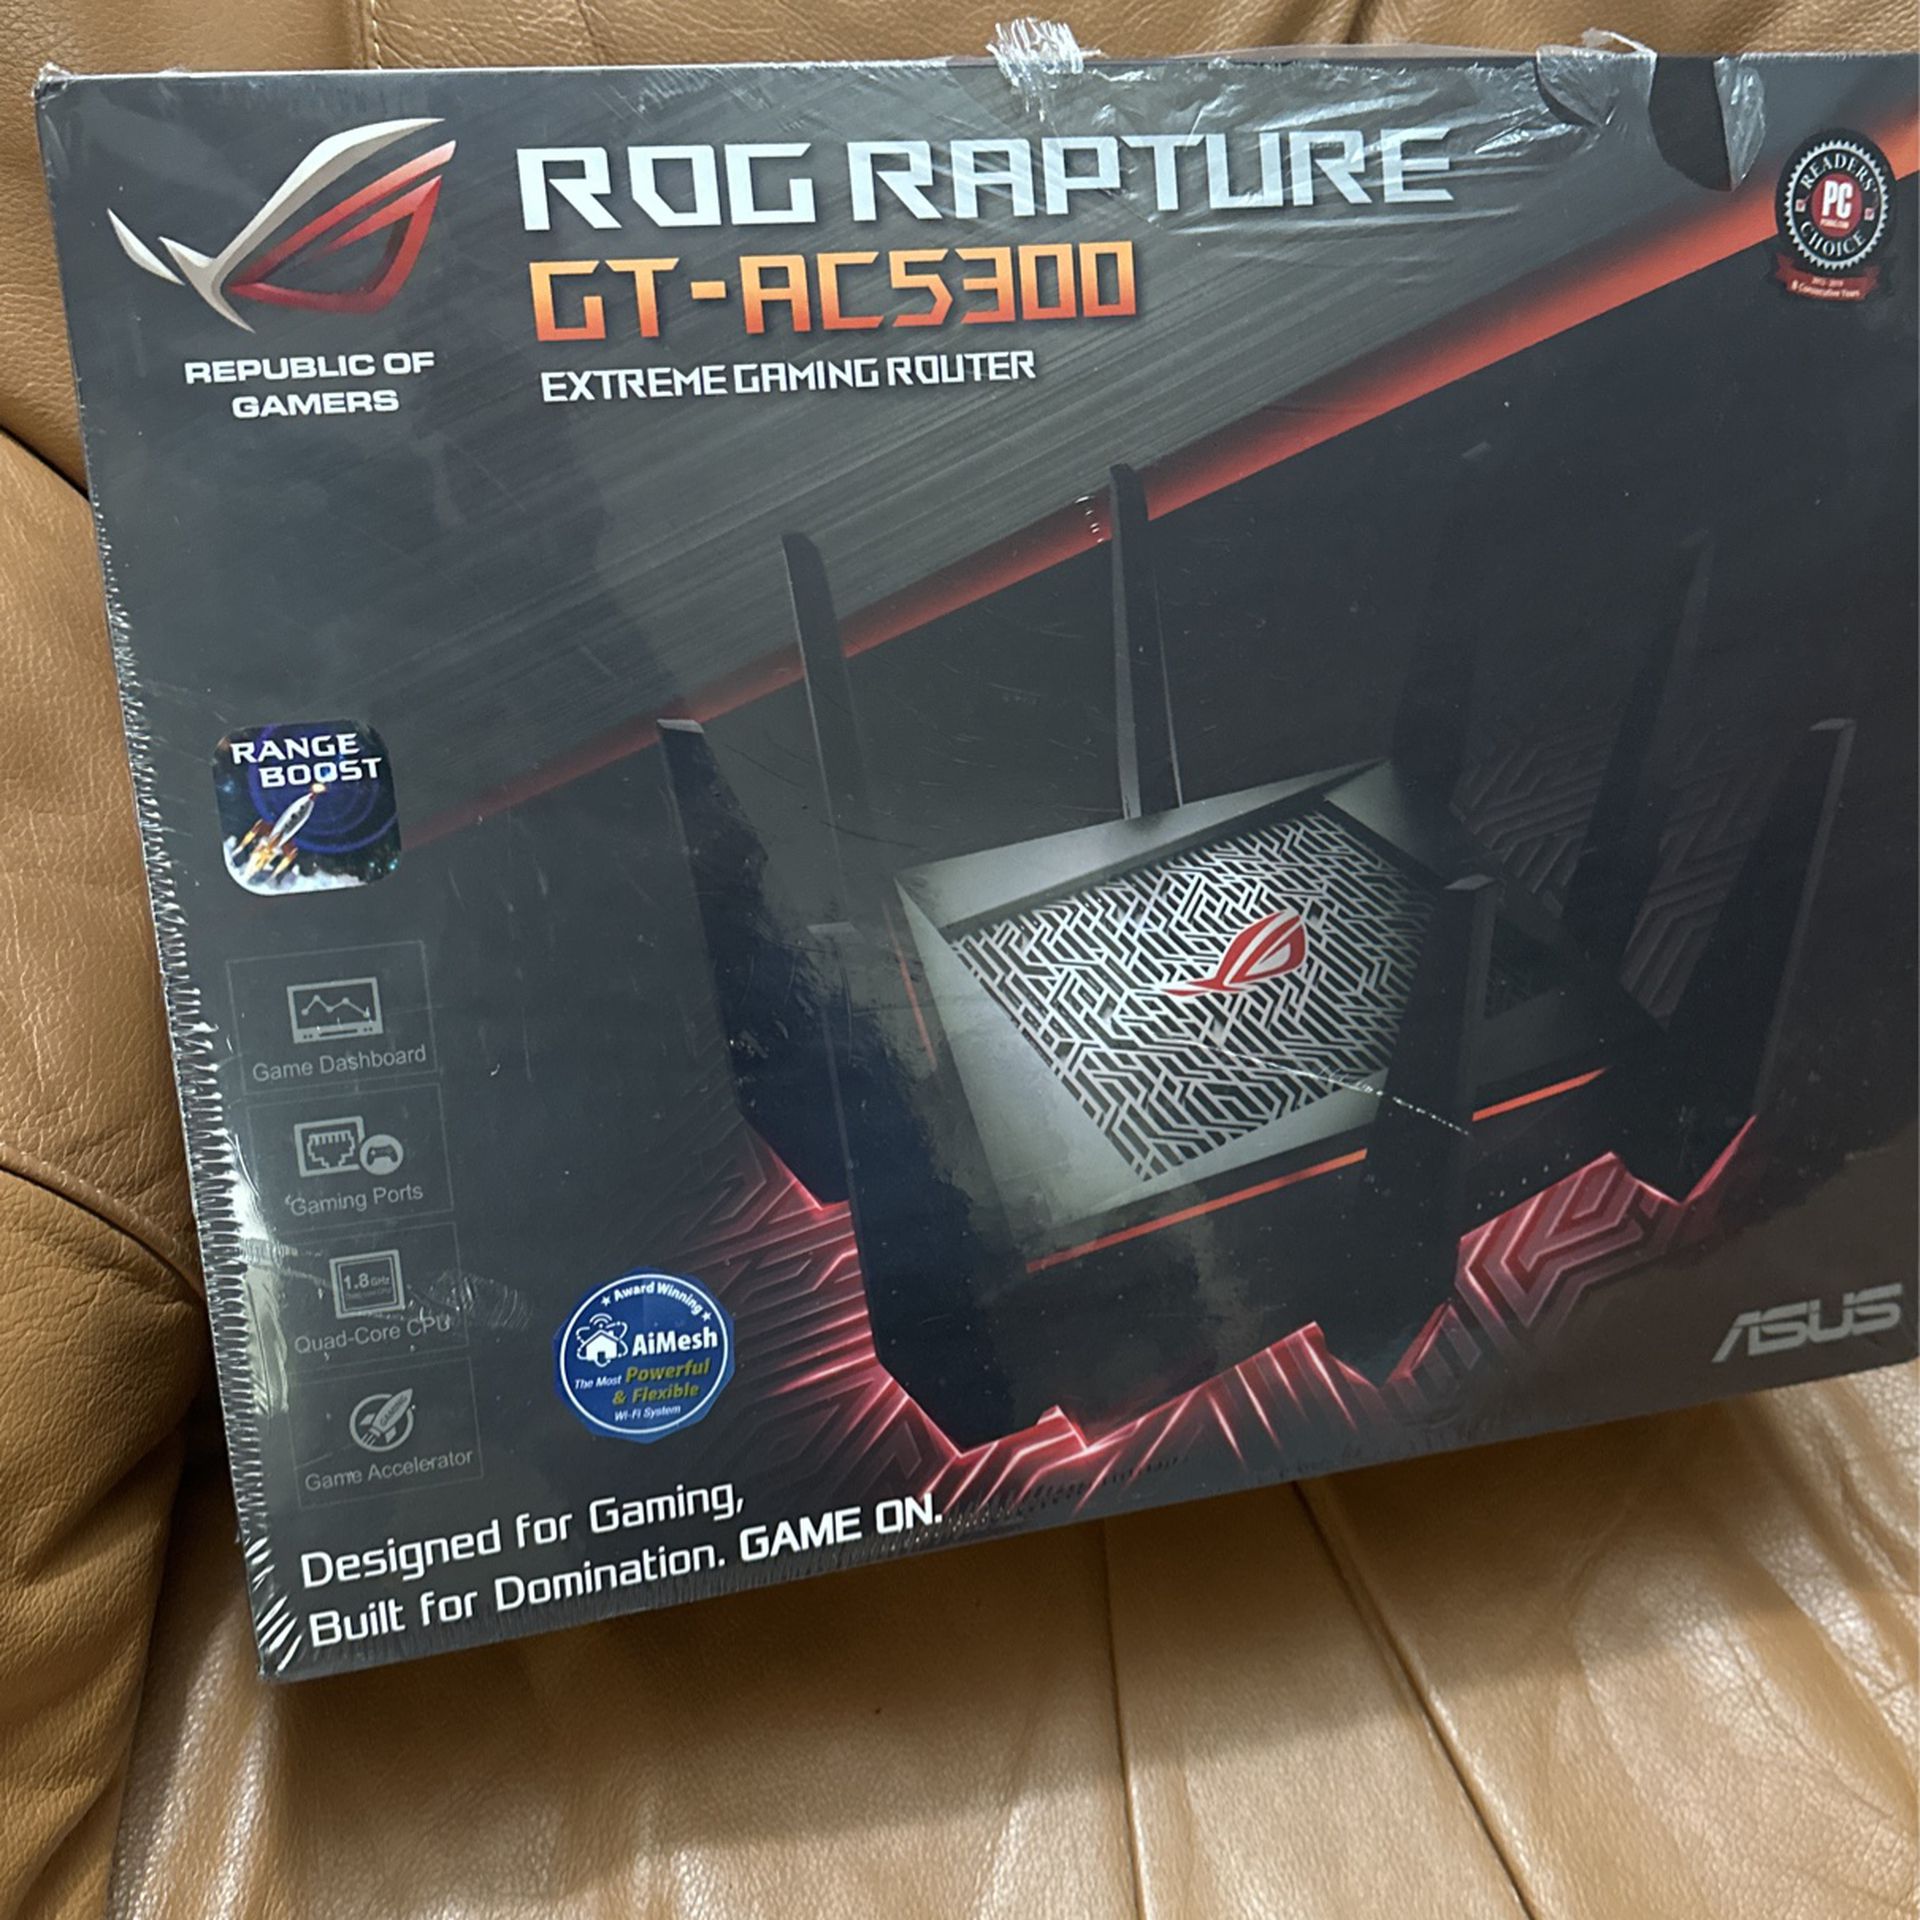 Asus ROG Rapture WiFi Gaming Router GT-AC5300 Tri Band Gigabit Wireless Router NEW